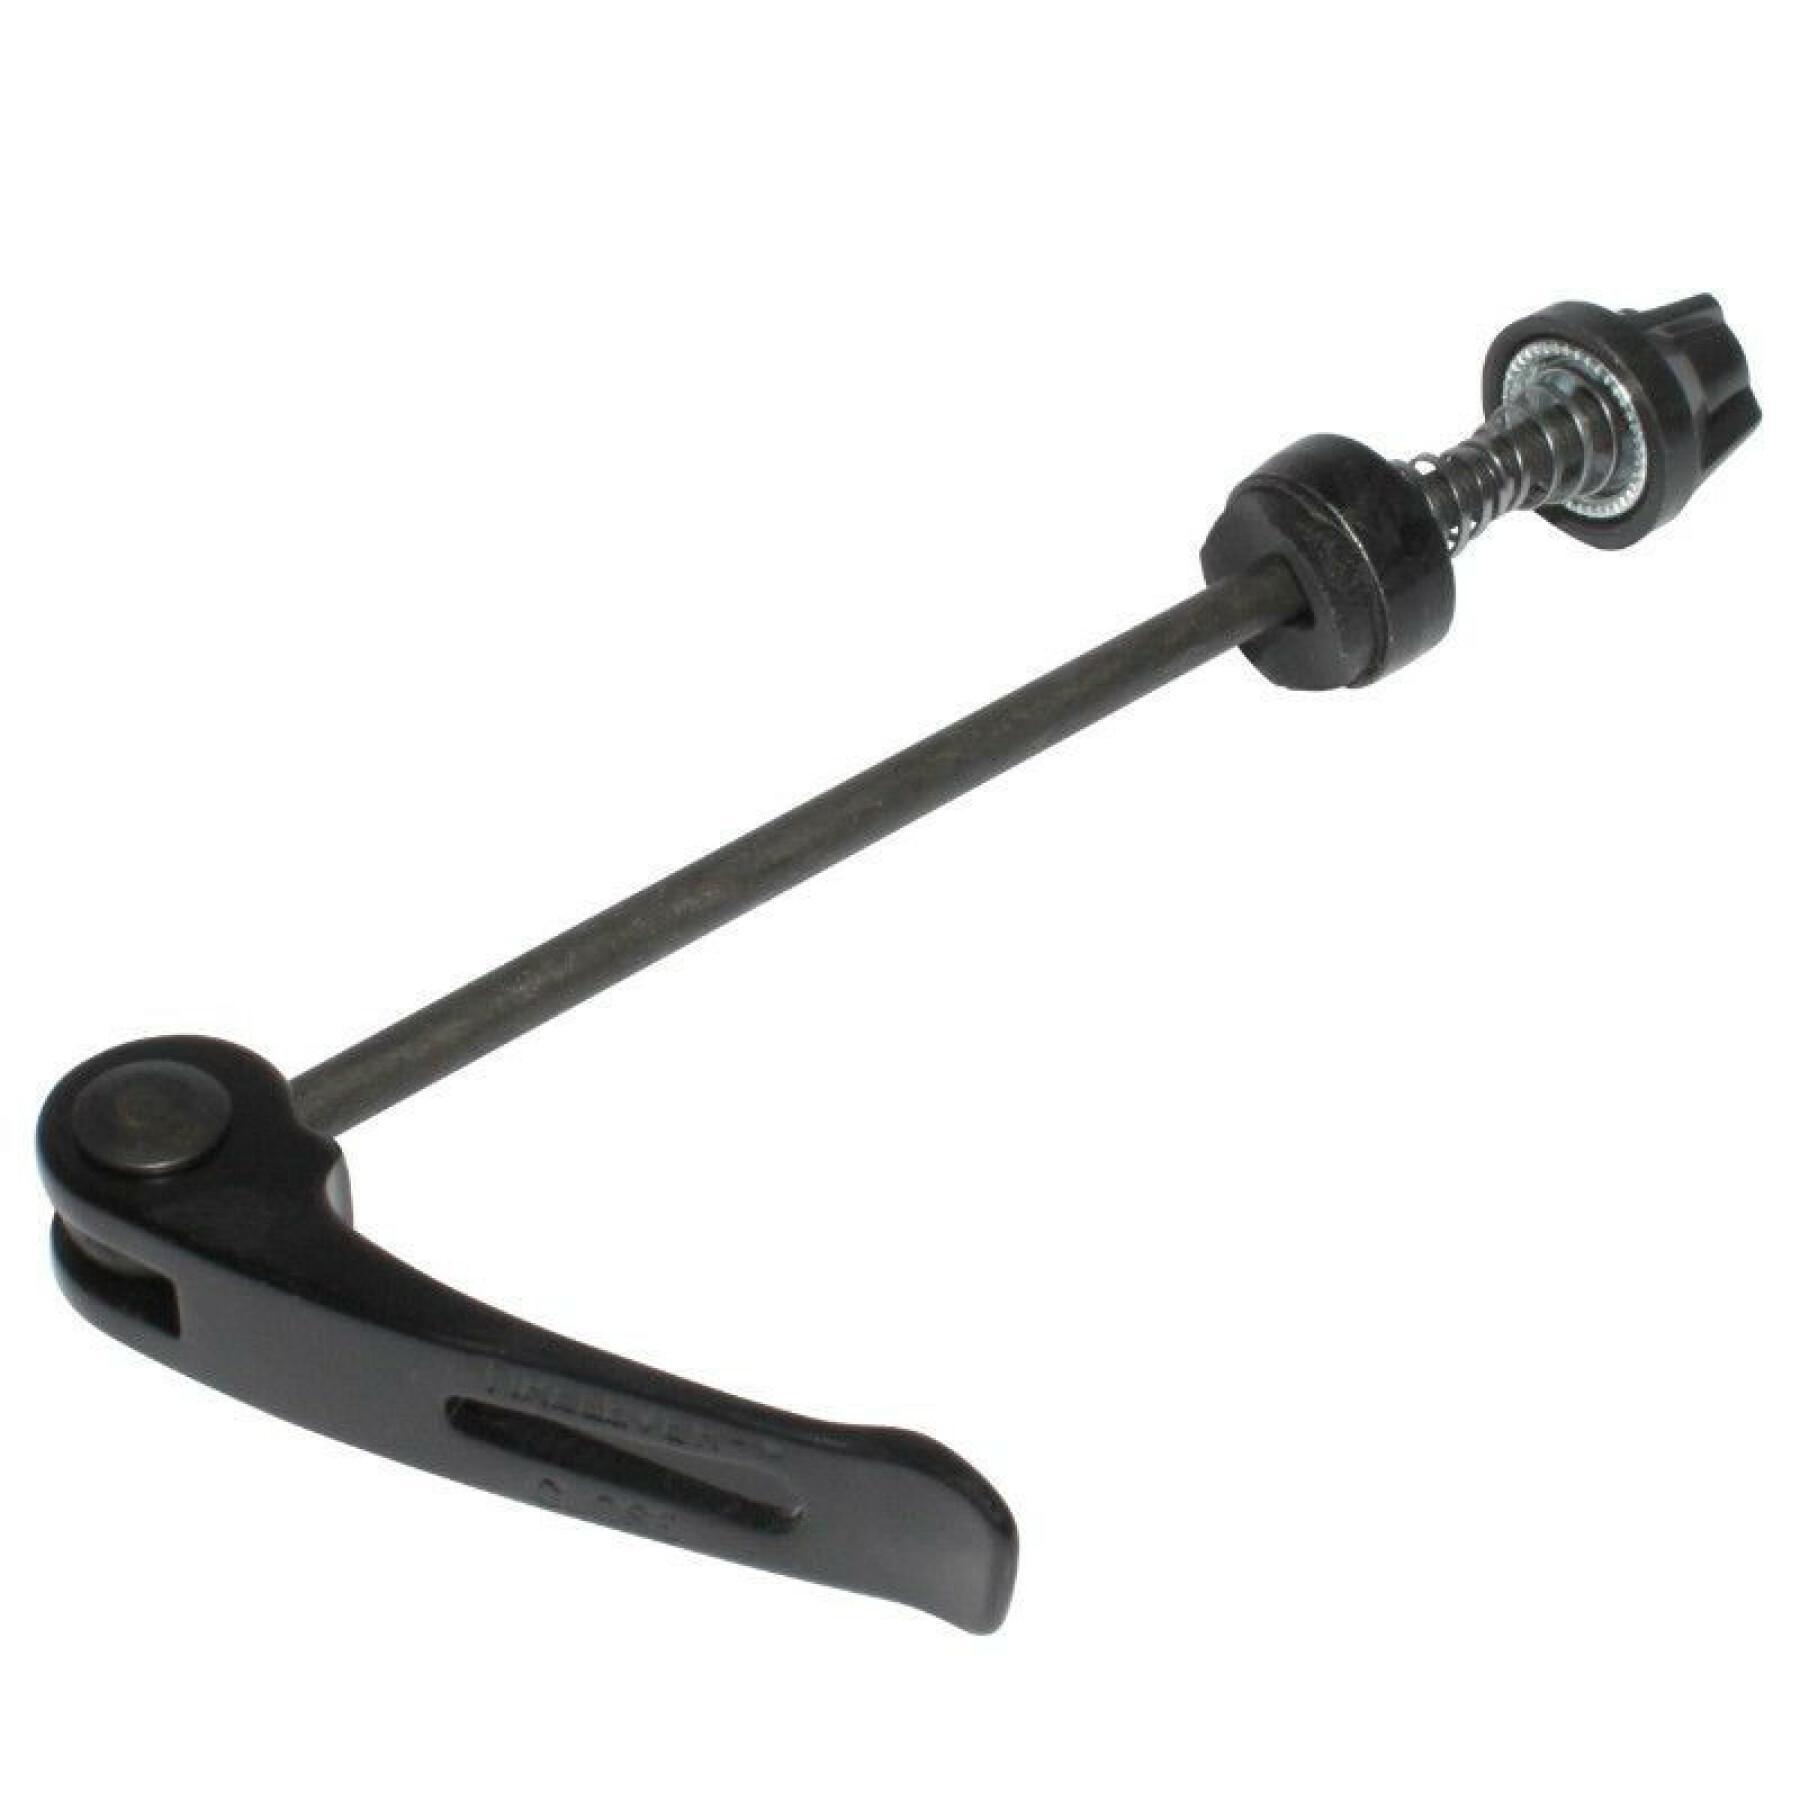 Front wheel quick release for mountain bike and road P2R